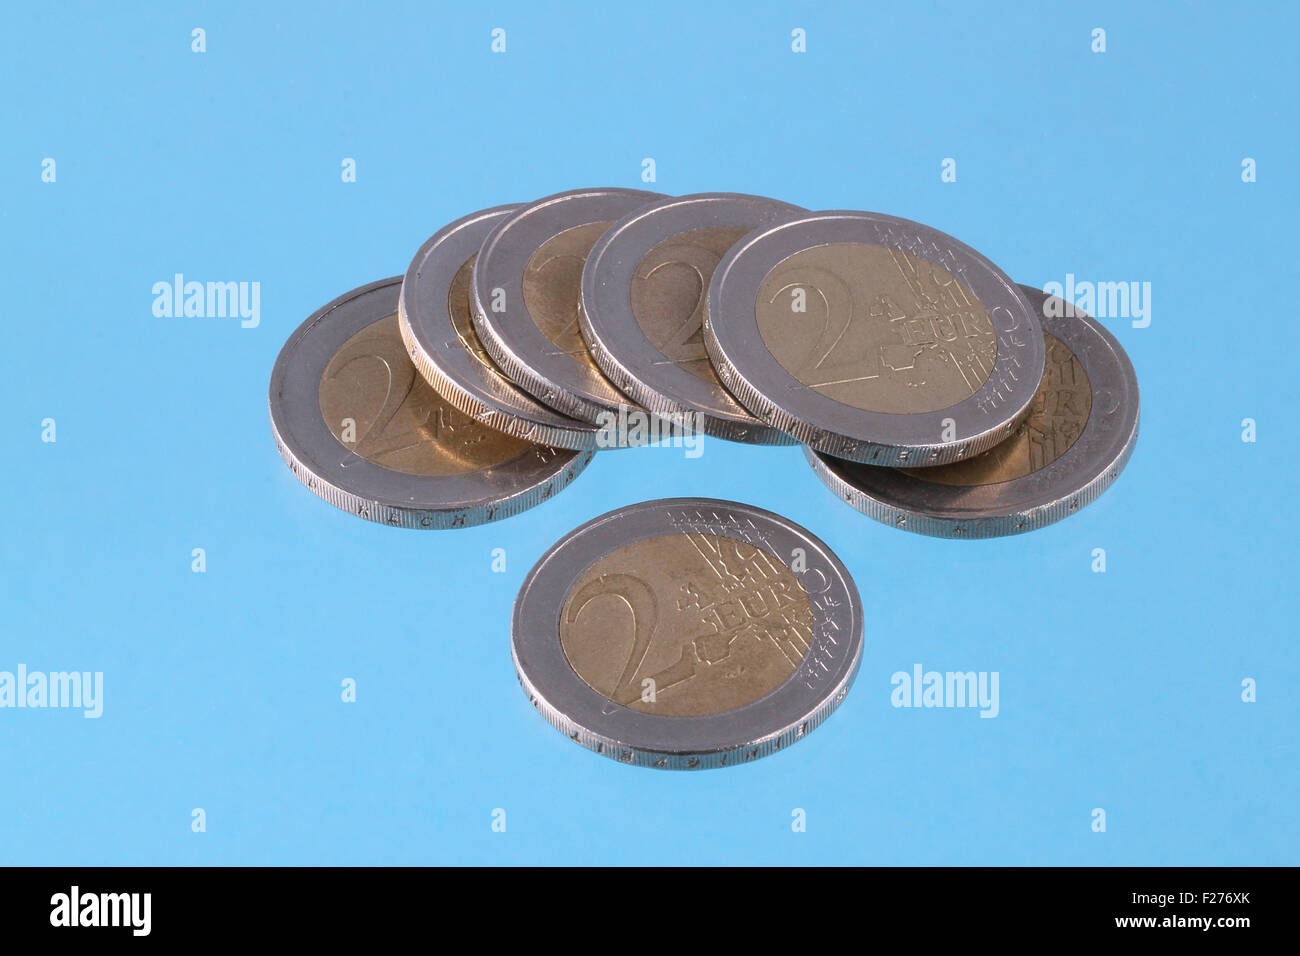 Close up photo of Euro coins on a blue chromakey background Stock Photo